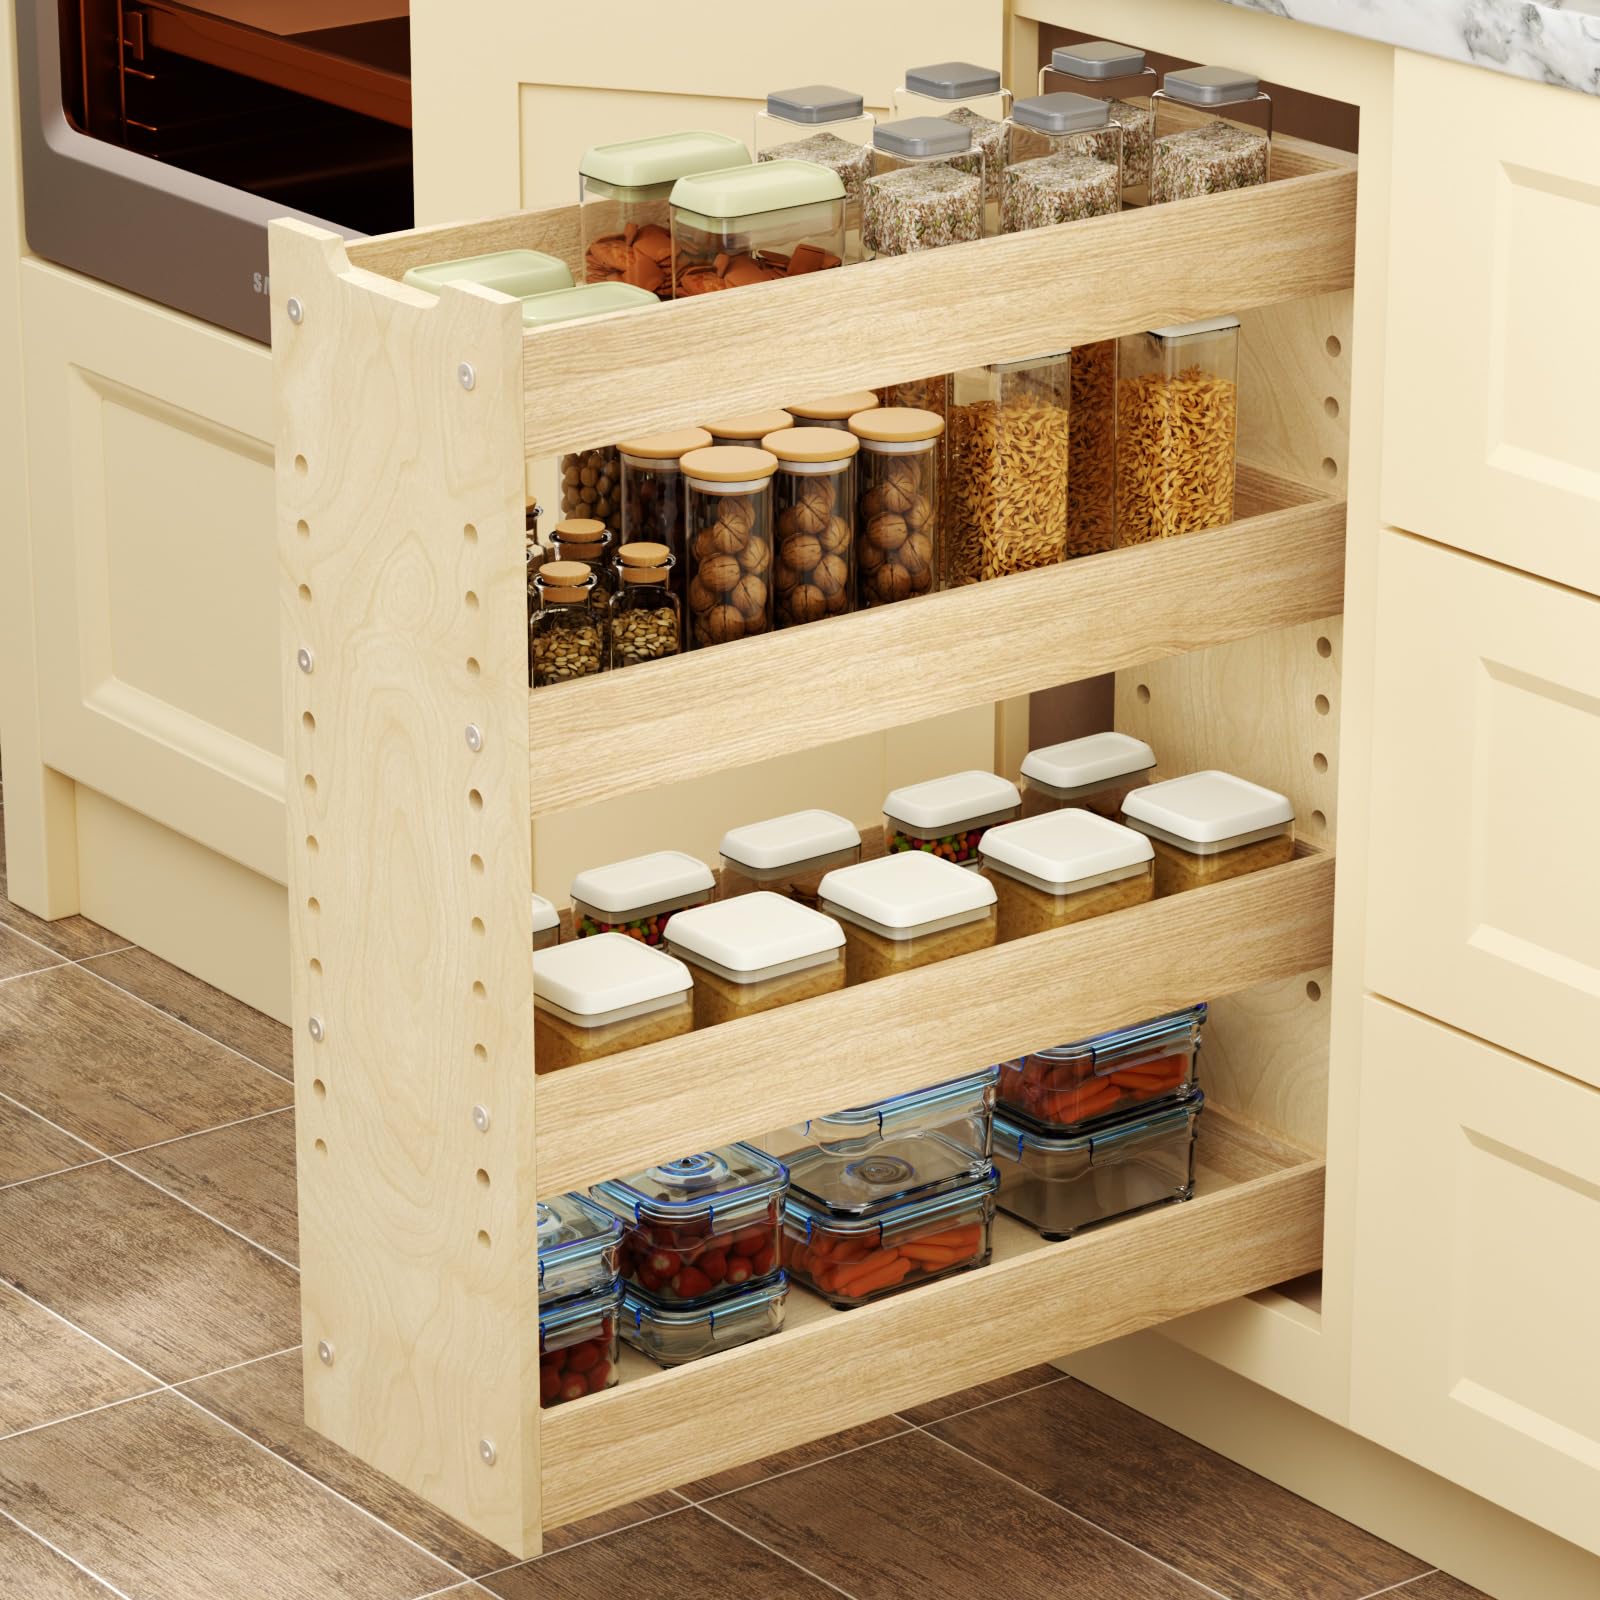 LOVMOR Adjustable Pull Out Cabinet Organizer 7½” W x 24½”H 4-Tier Narrow Cabinet Drawers Slide Out with Soft Close Wood Spice Rack for Narrow Cabinet